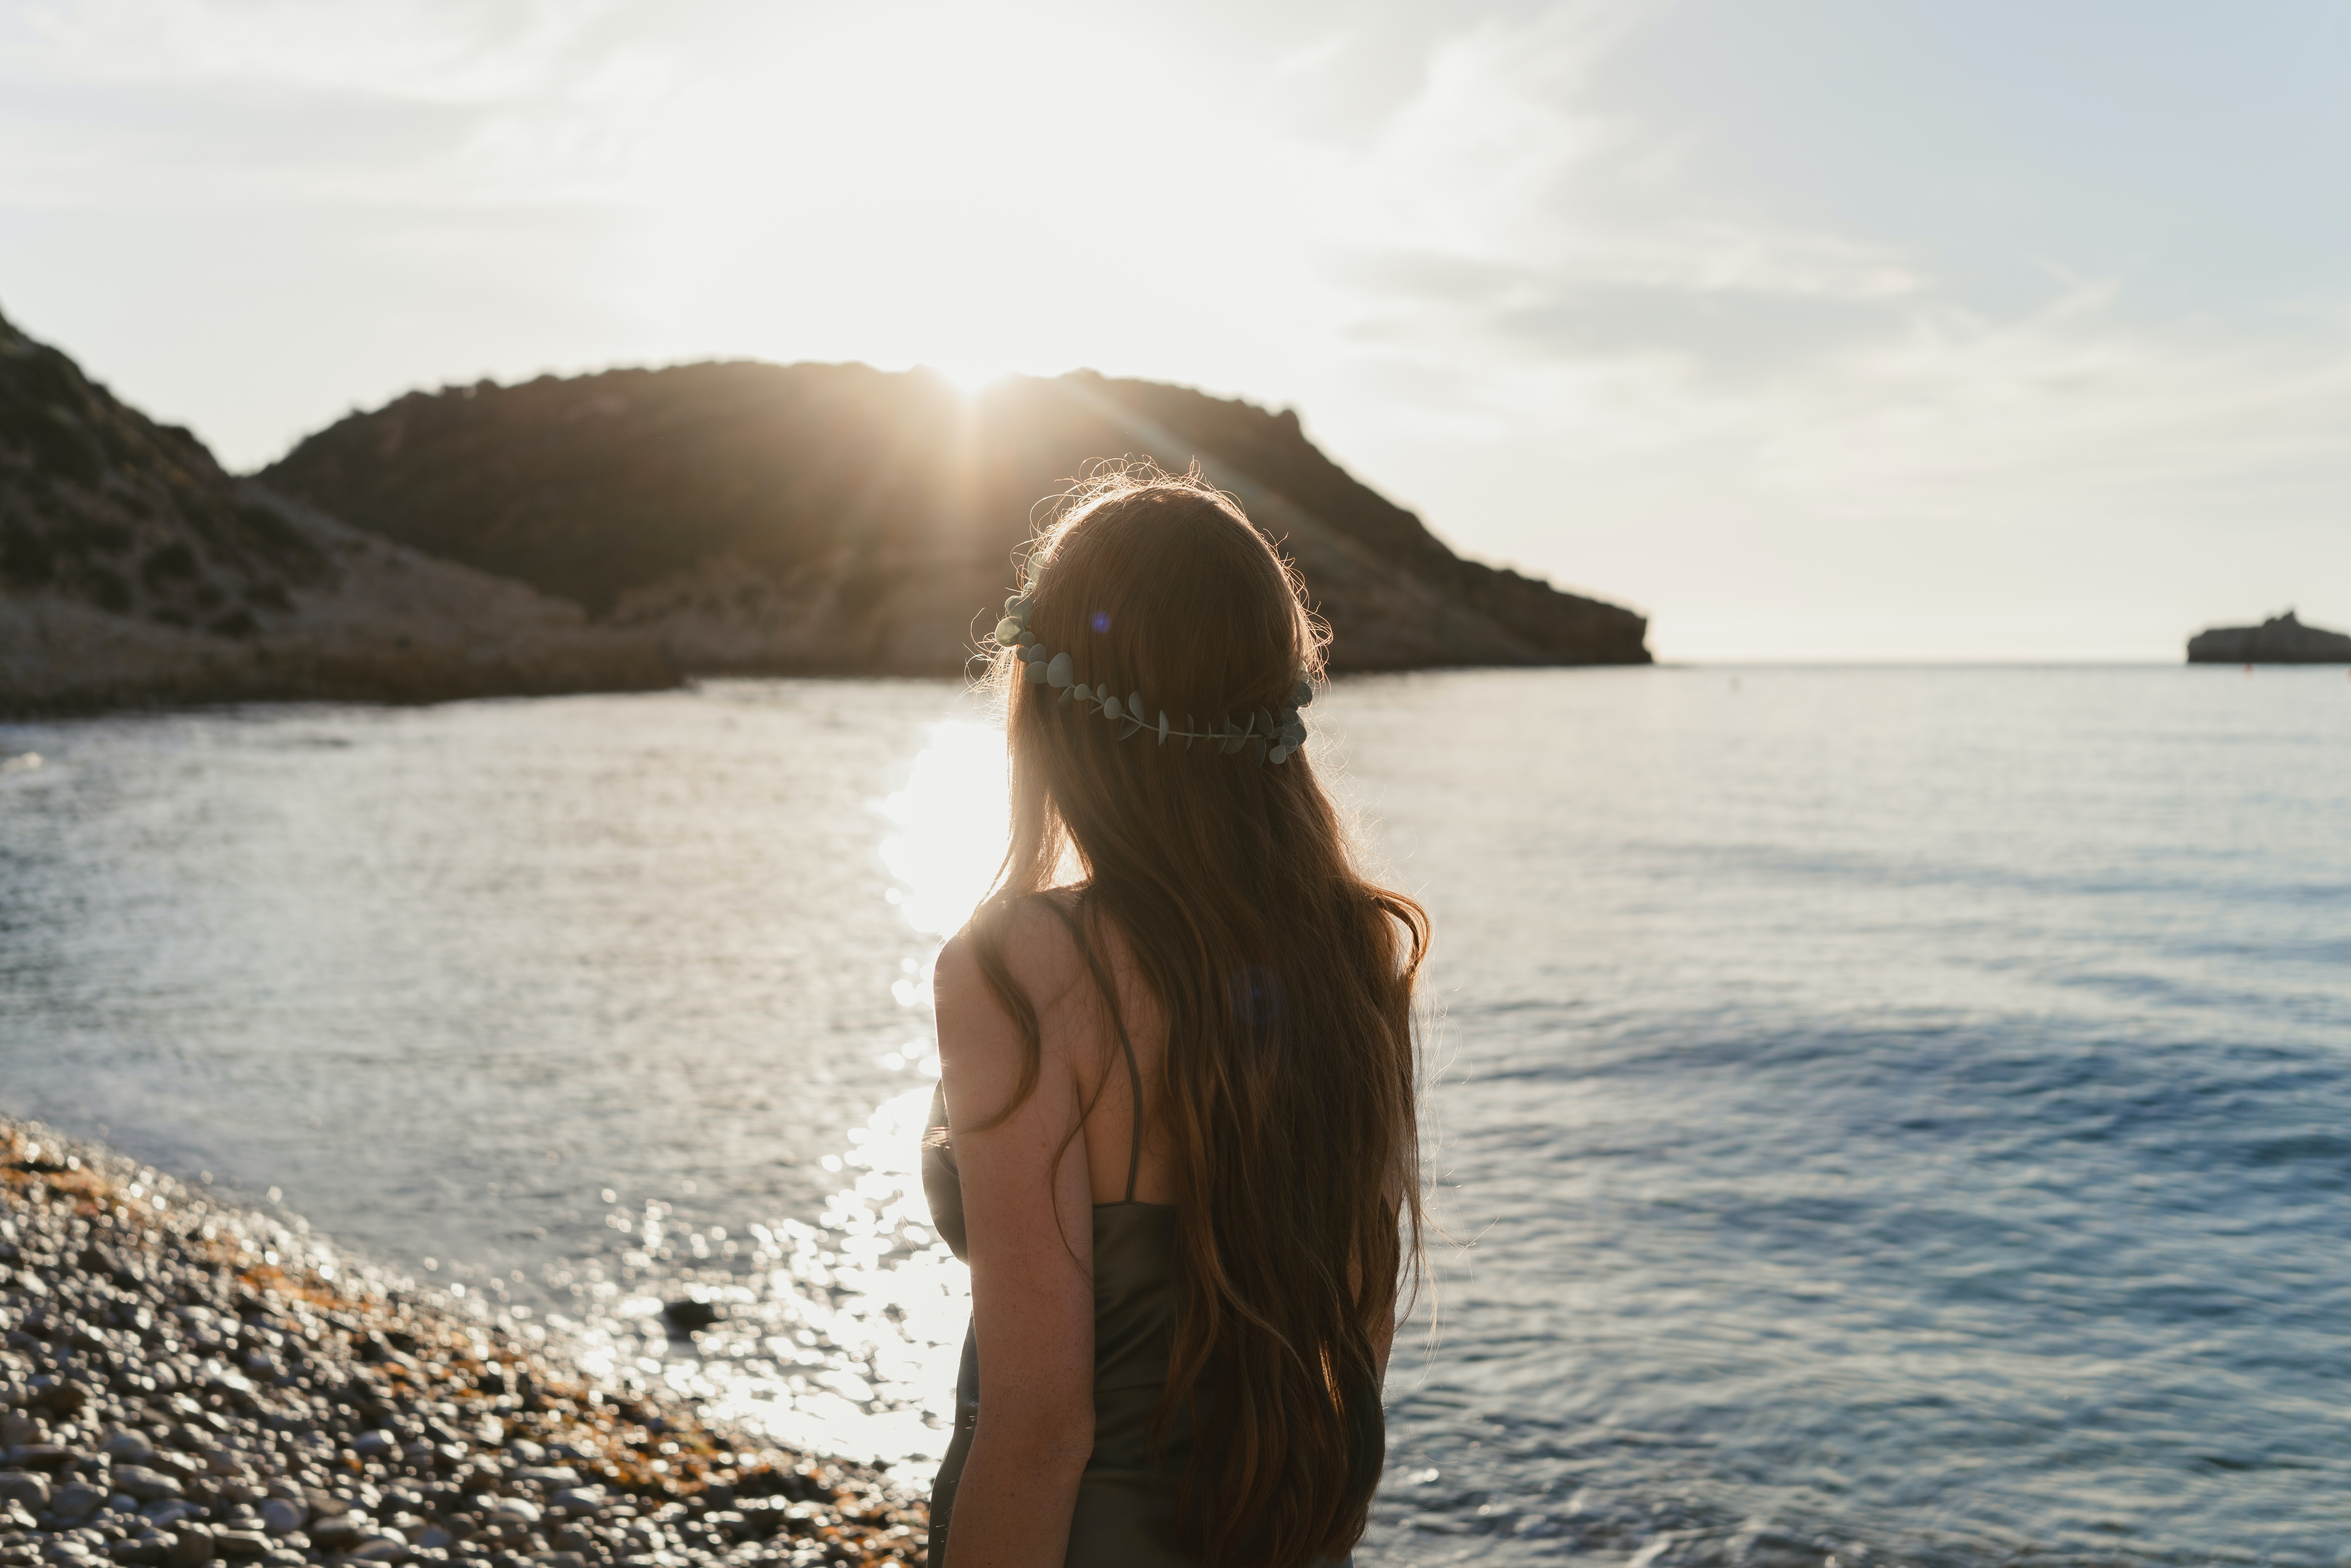 Photo by MEUM MARE: https://www.pexels.com/photo/back-view-of-woman-looking-into-sea-12504162/